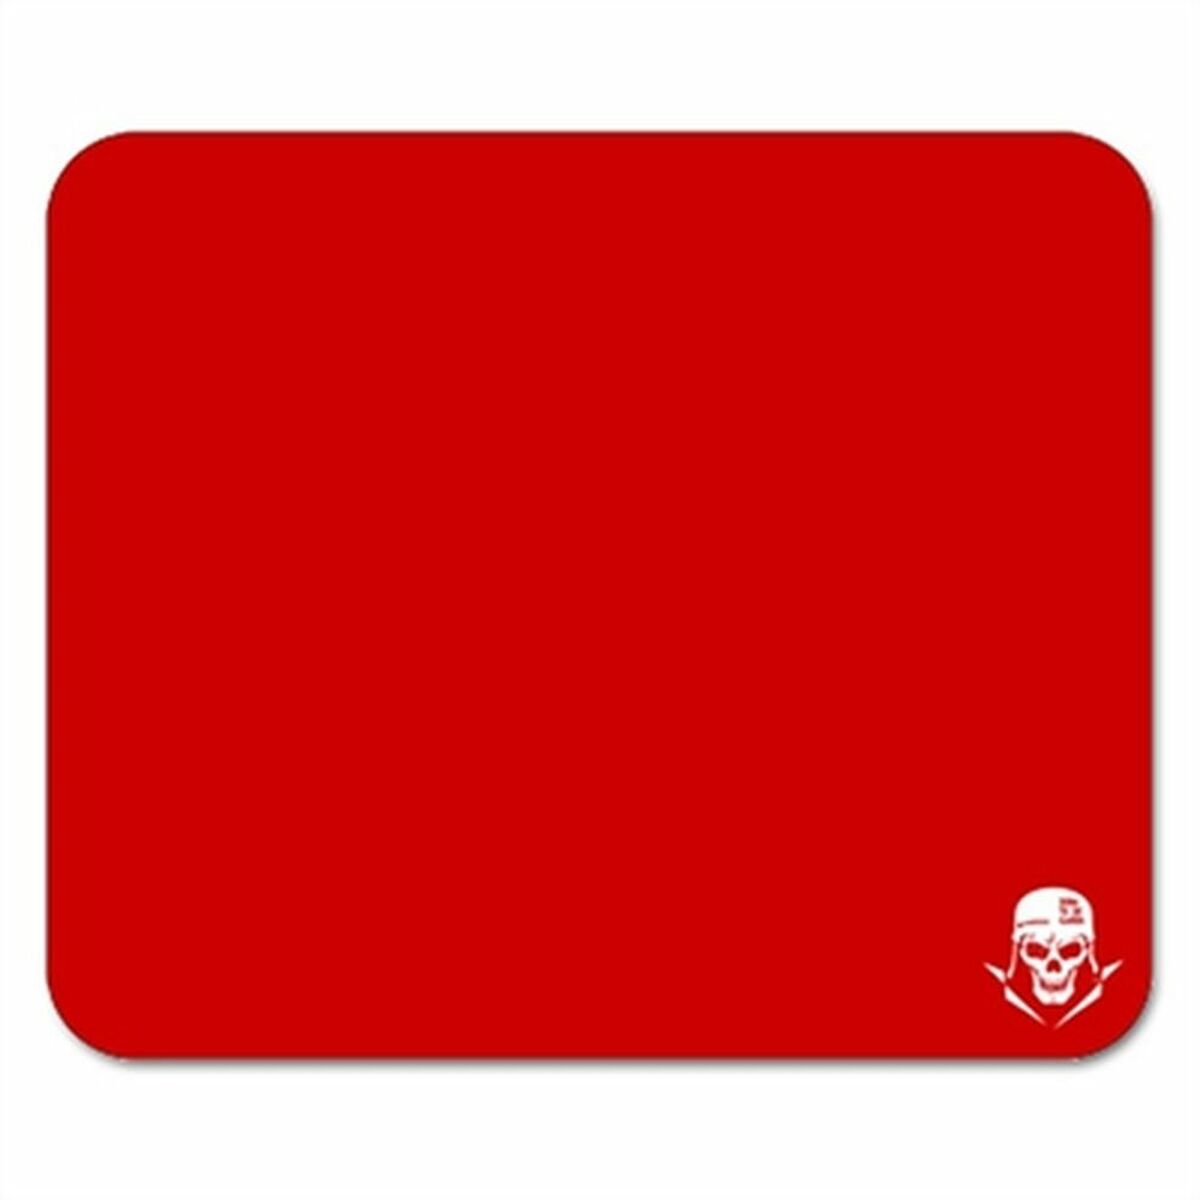 Gaming Mouse Mat Skullkiller GMPR1 Rouge non glissant